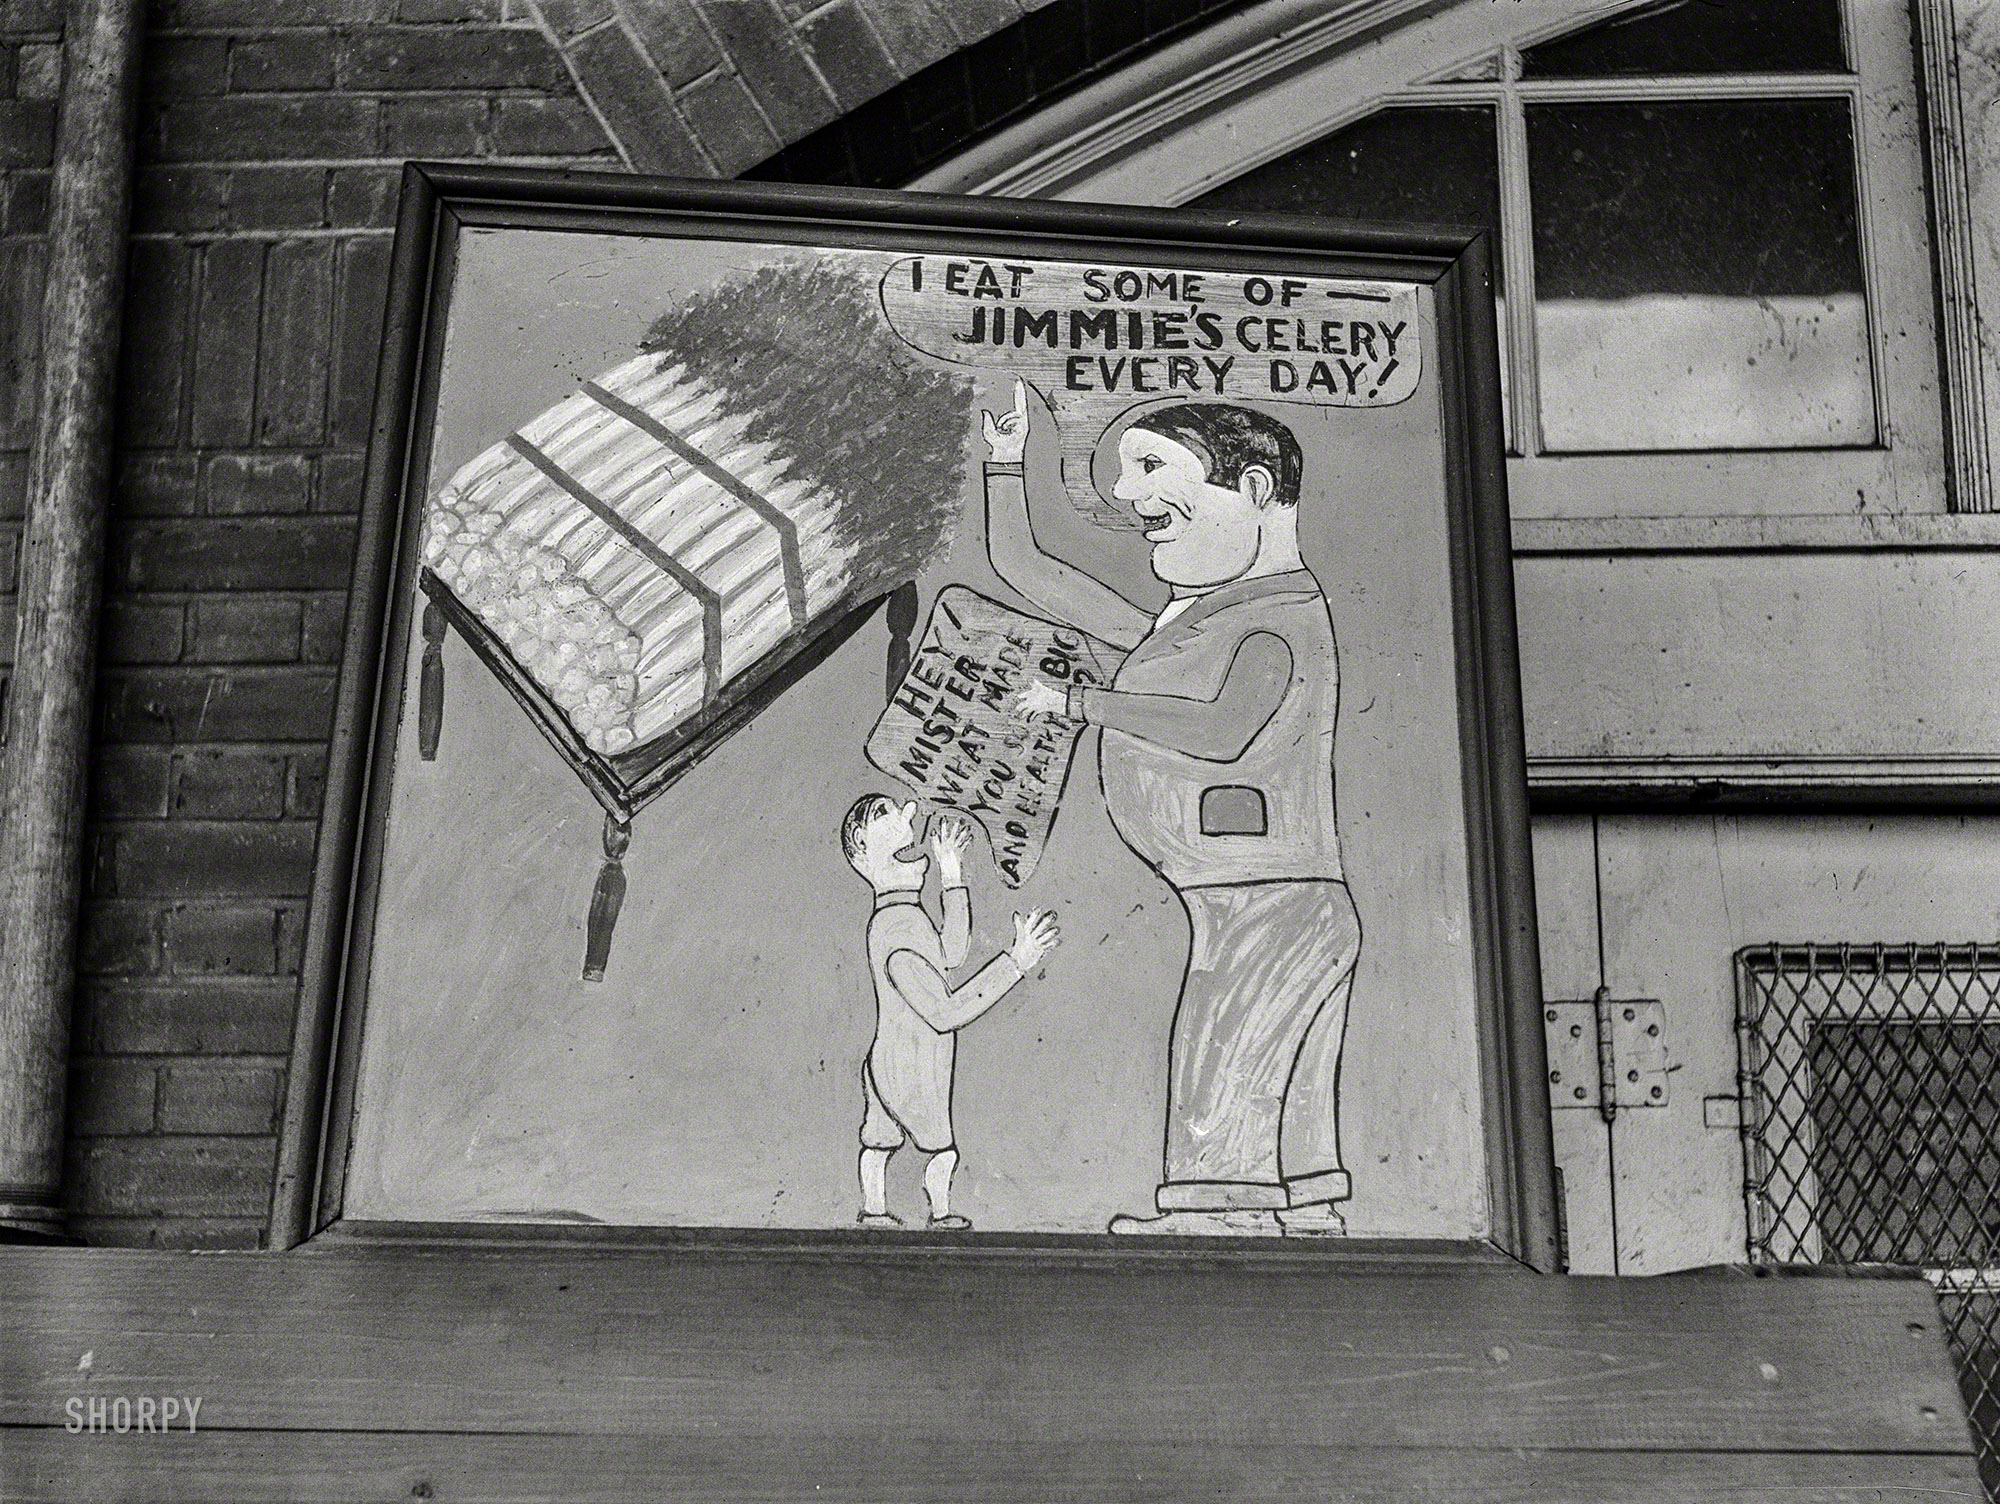 &nbsp; &nbsp; &nbsp; &nbsp; BOY: Hey! Mister what made you so big and healthy?
&nbsp; &nbsp; &nbsp; &nbsp; MAN: I eat some of &nbsp;—&nbsp; Jimmie's celery every day!
July 1939. Washington, D.C. "Sign in wholesale market." Medium format acetate negative by David Myers for the Farm Security Administration. View full size.